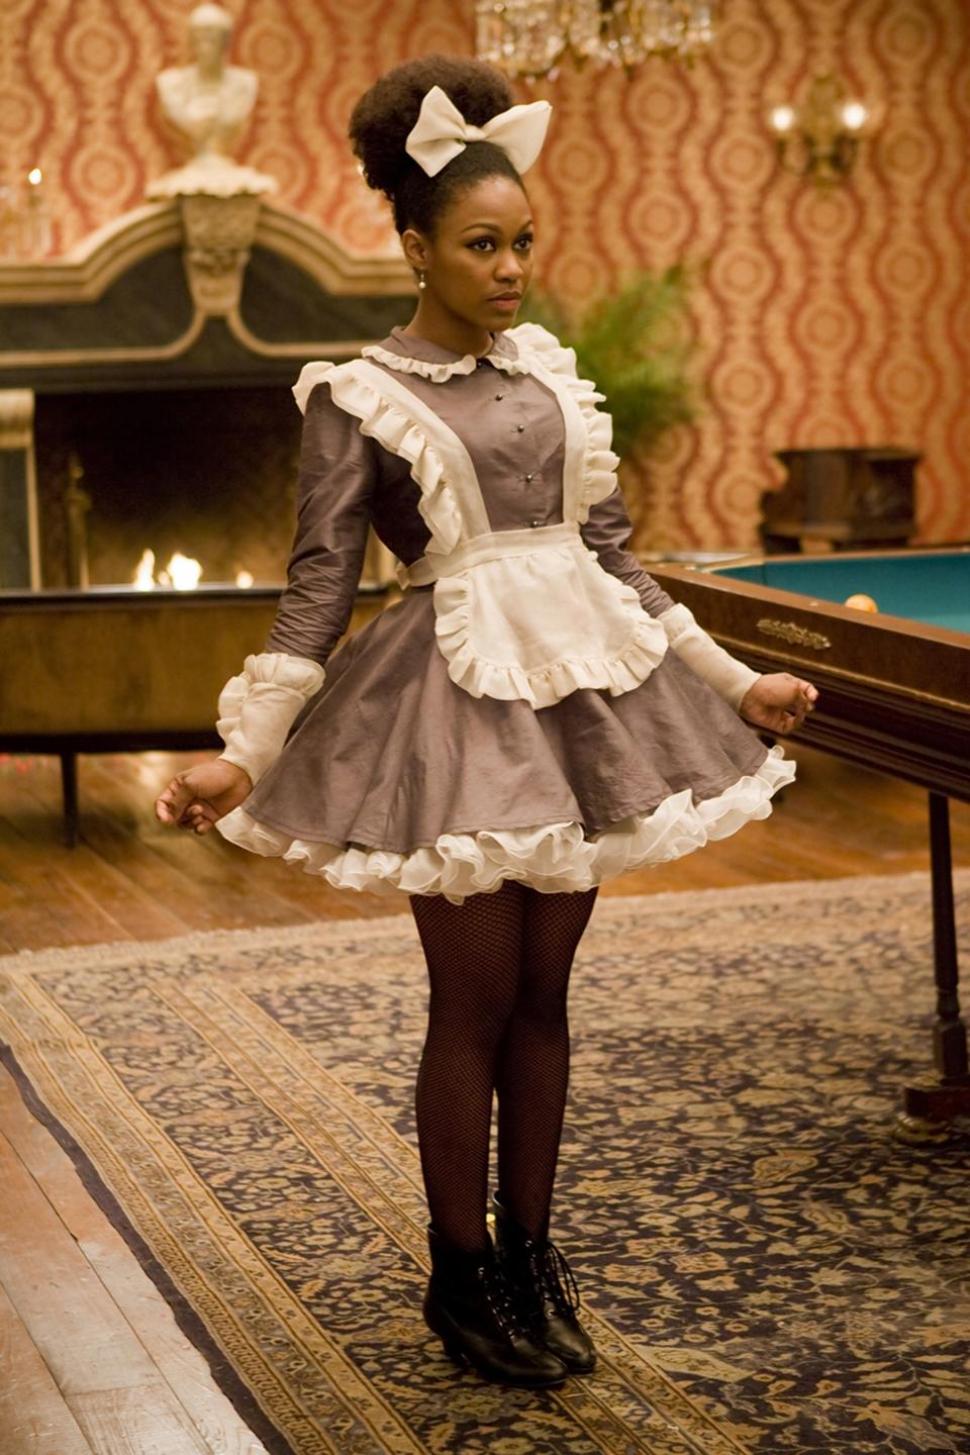 Watts in costume during a scene from ‘Django Unchained.